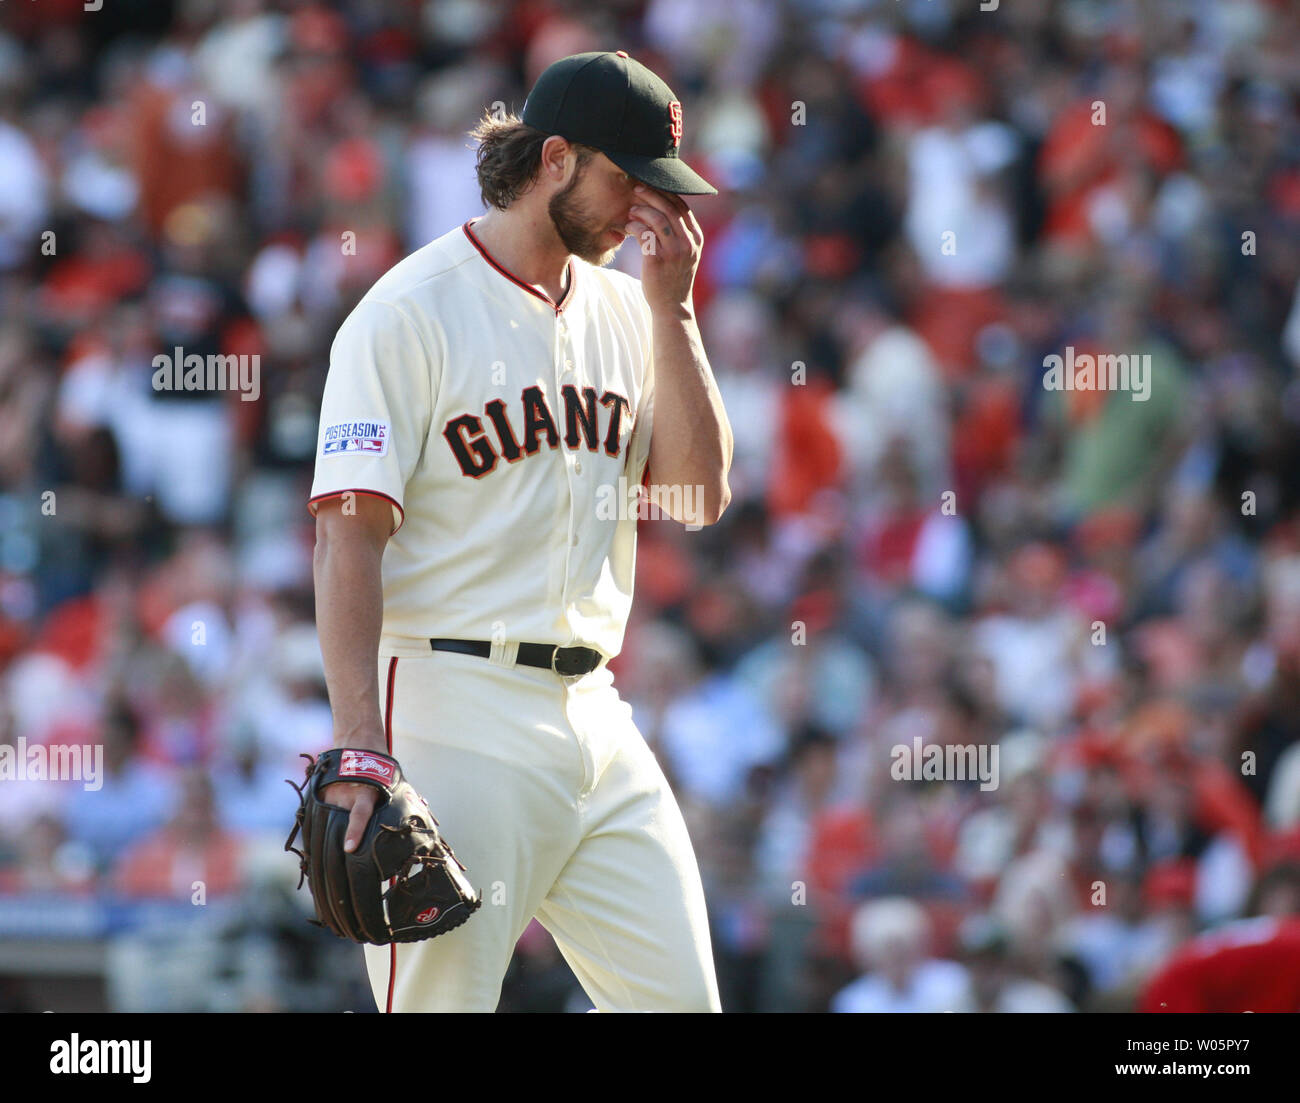 San Francisco Giants pitcher Madison Bumgarner walks off the mound after a disastrous seventh inning,  in which his throwing error allowed two Washington Nationals to score, in game 3 of the National League Division Series at AT&T Park in San Francisco on October 6, 2014. Bumgarner took the 4-1 loss. UPI/Bruce Gordon Stock Photo